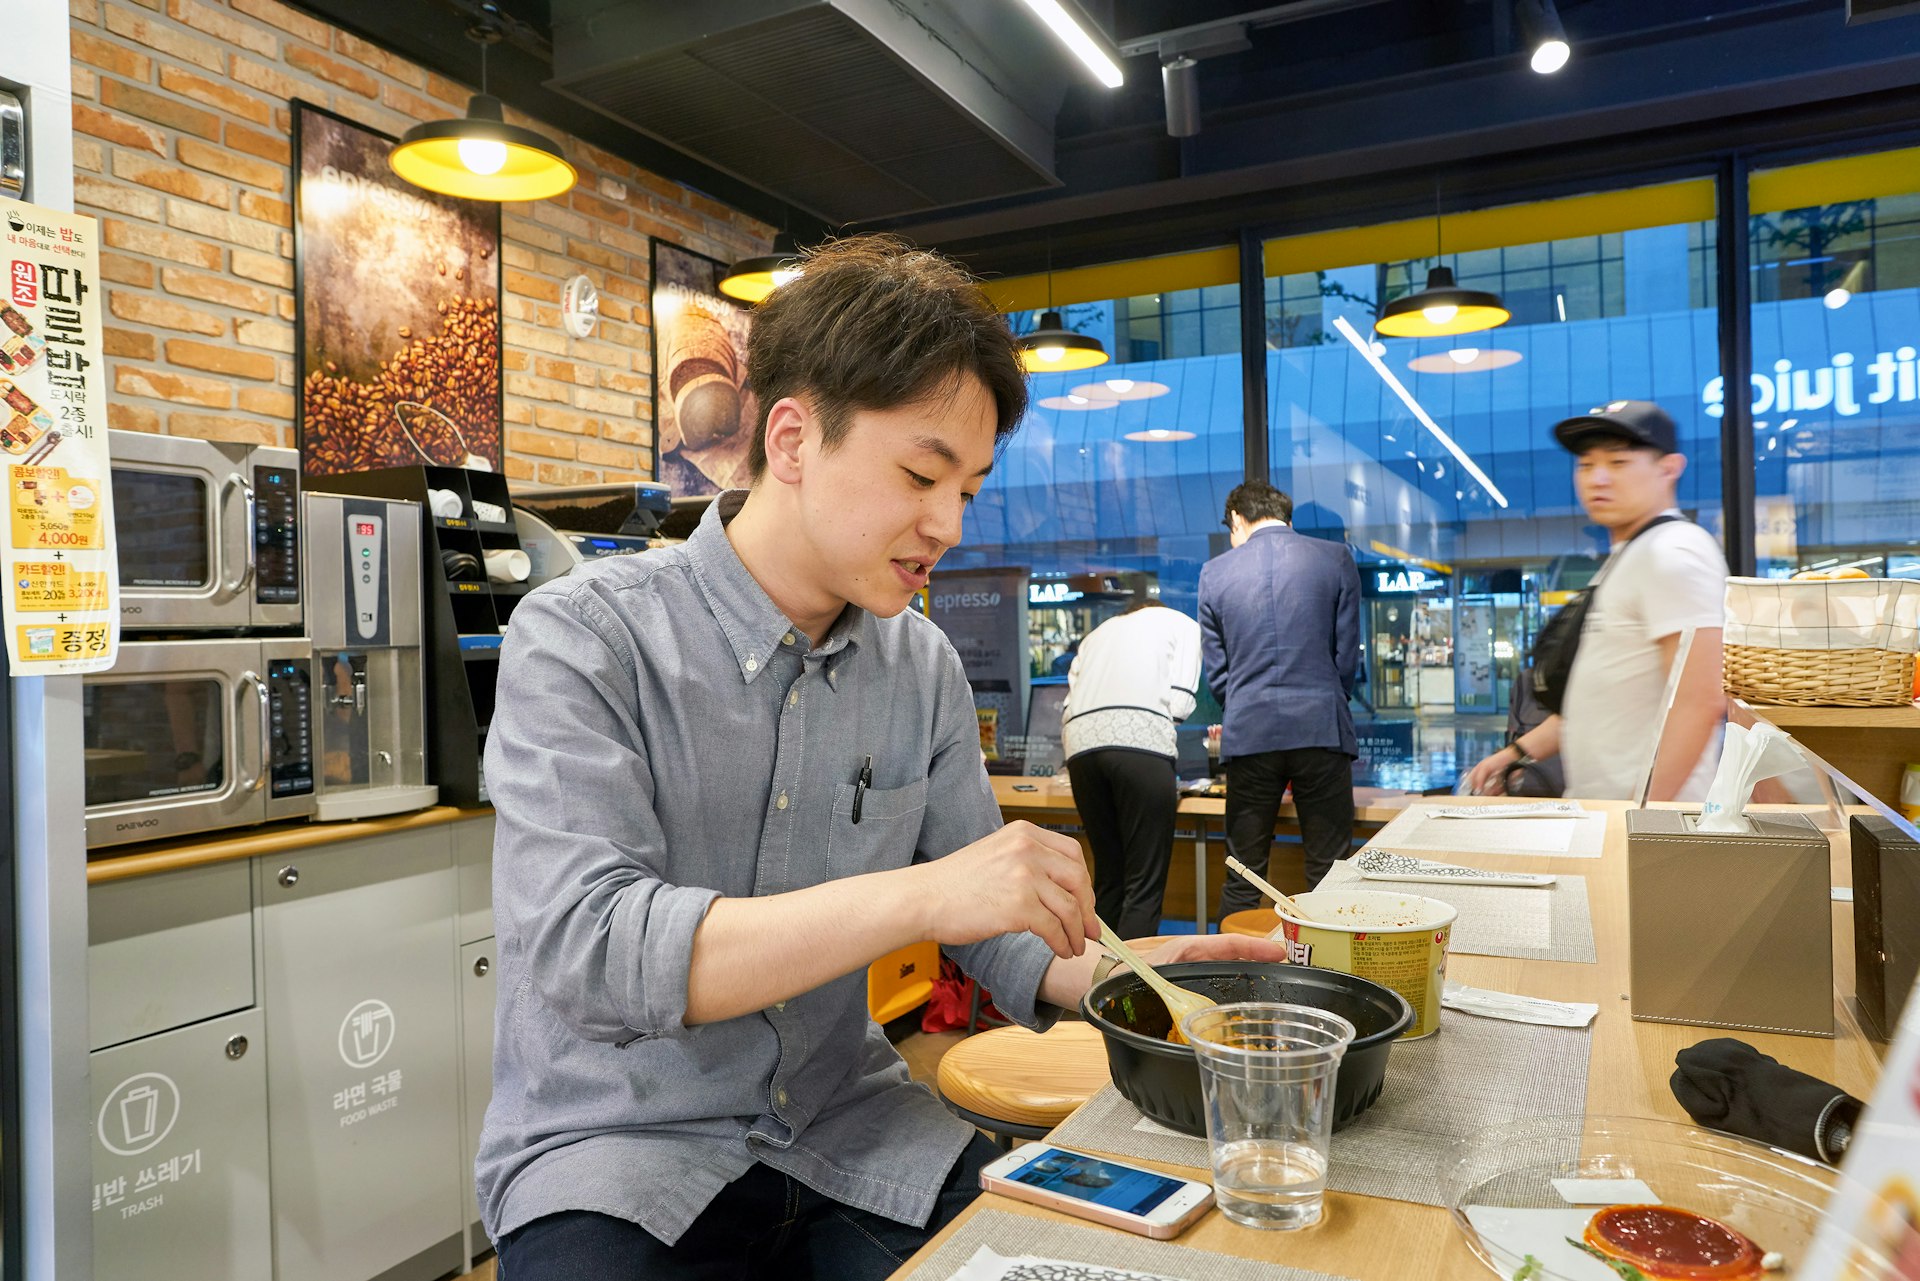 A man eats at a counter inside a convenience store in Seoul, South Korean